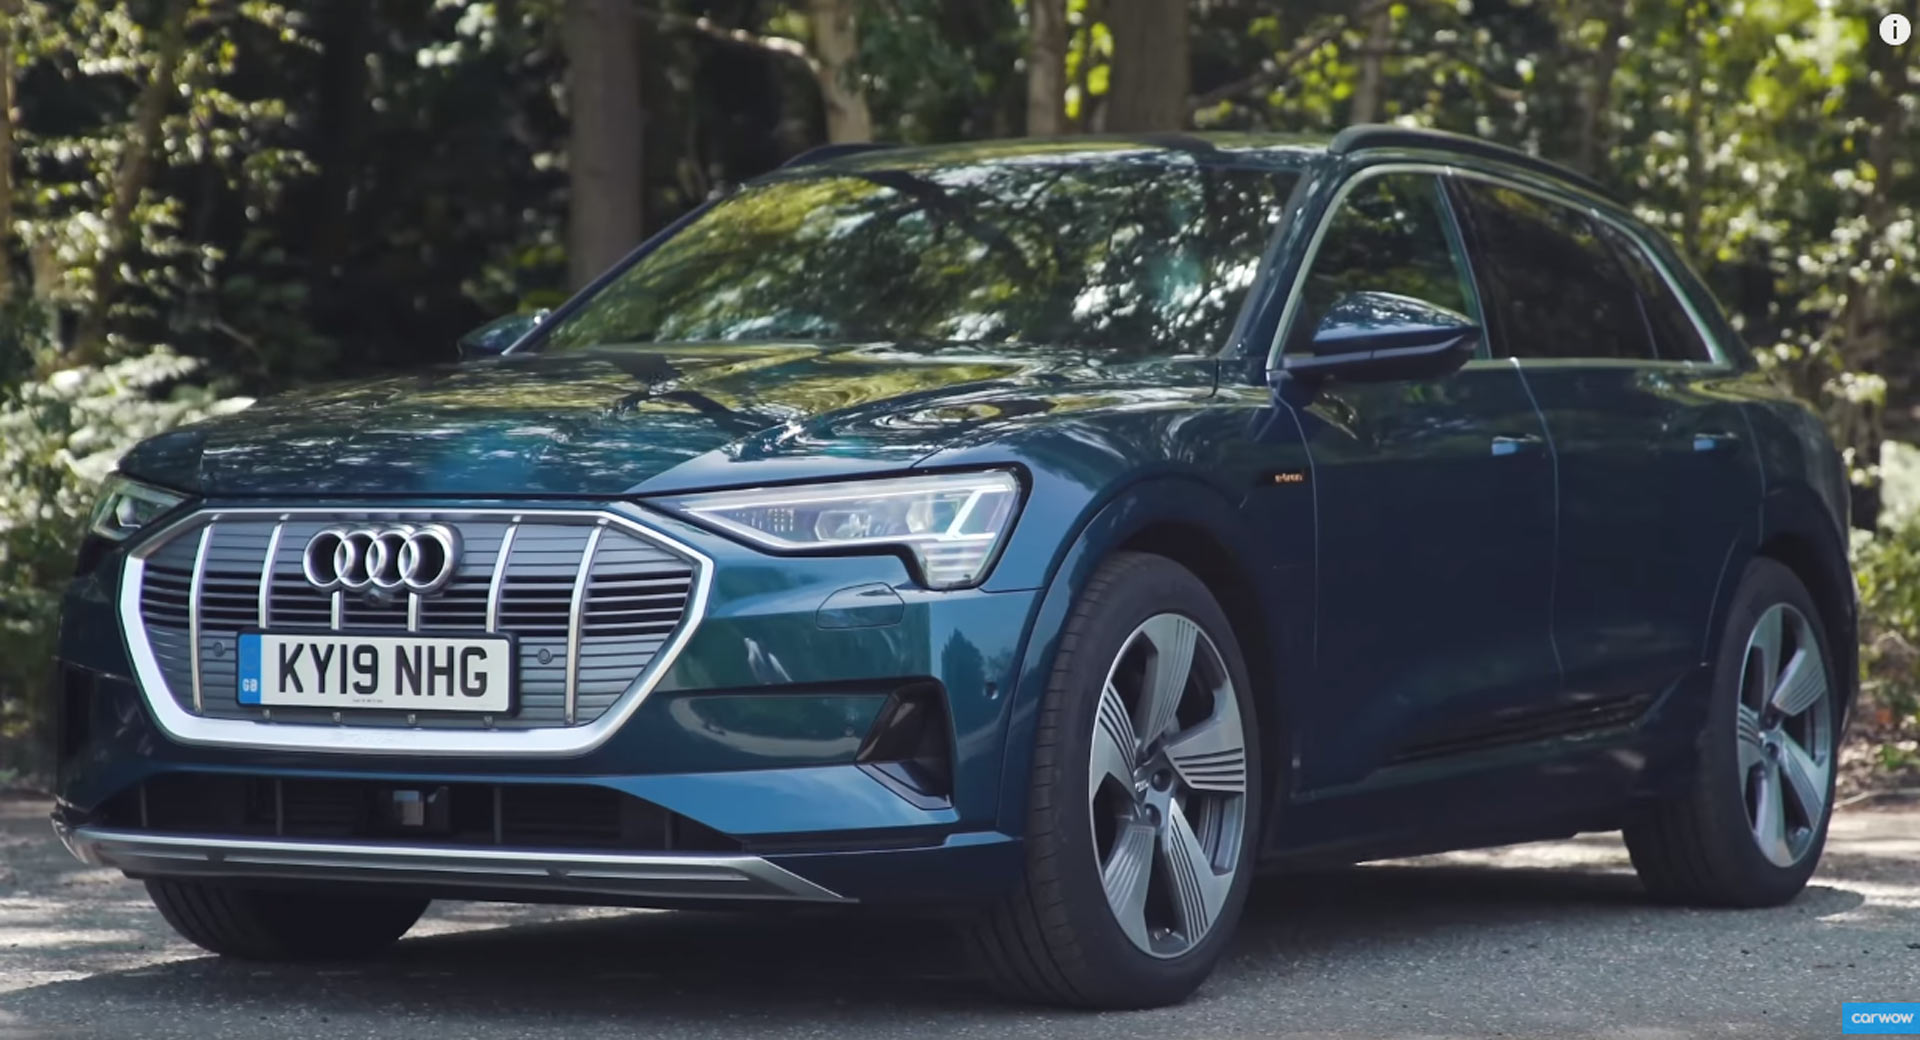 Can The Audi E-Tron SUV Convince You To Go Down The All-Electric Road?